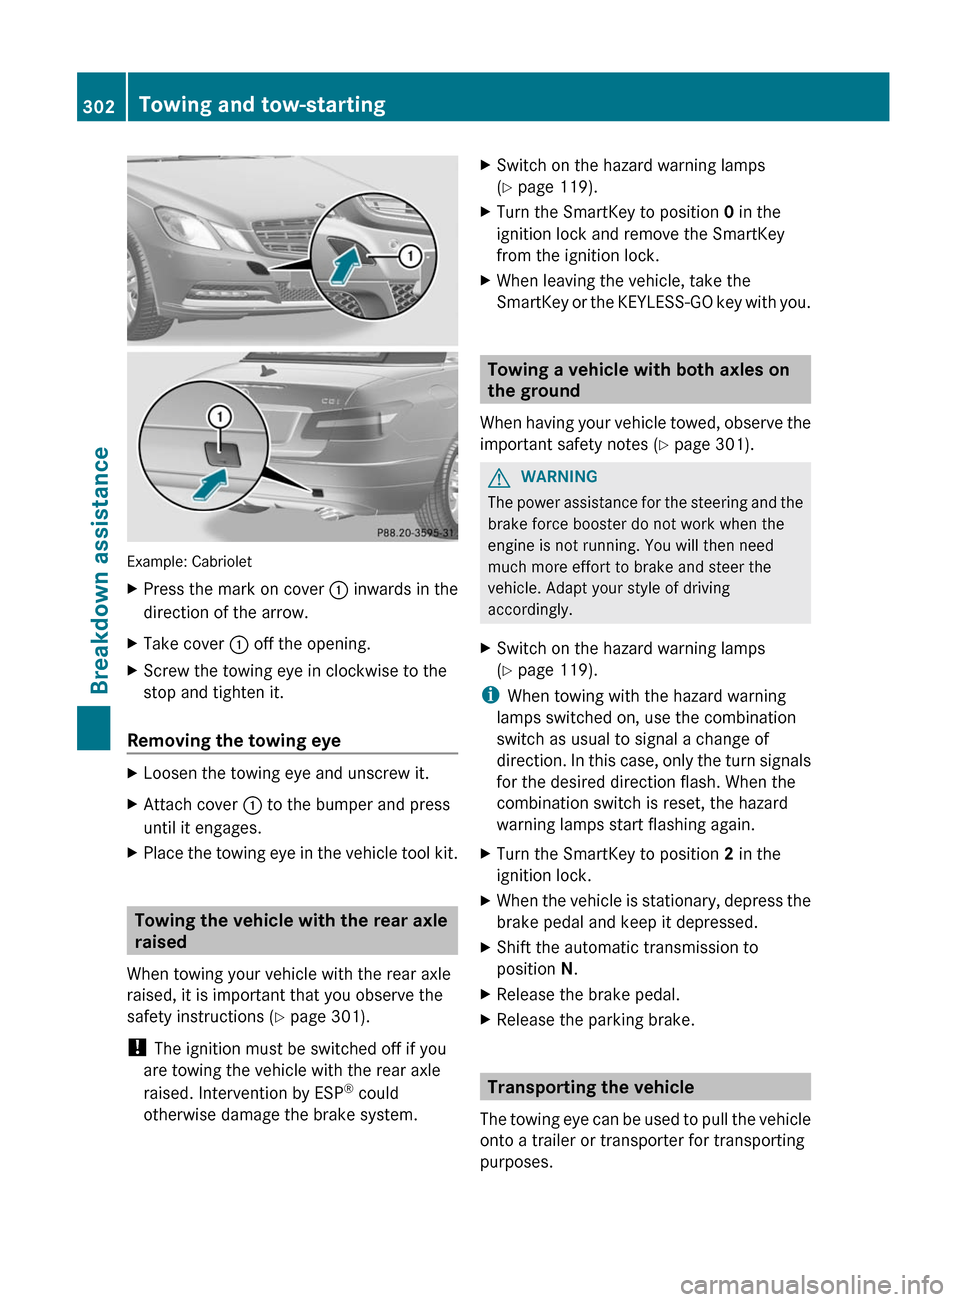 MERCEDES-BENZ E-Class COUPE 2012 C207 Owners Guide Example: Cabriolet
XPress the mark on cover : inwards in the
direction of the arrow.XTake cover  : off the opening.XScrew the towing eye in clockwise to the
stop and tighten it.
Removing the towing ey